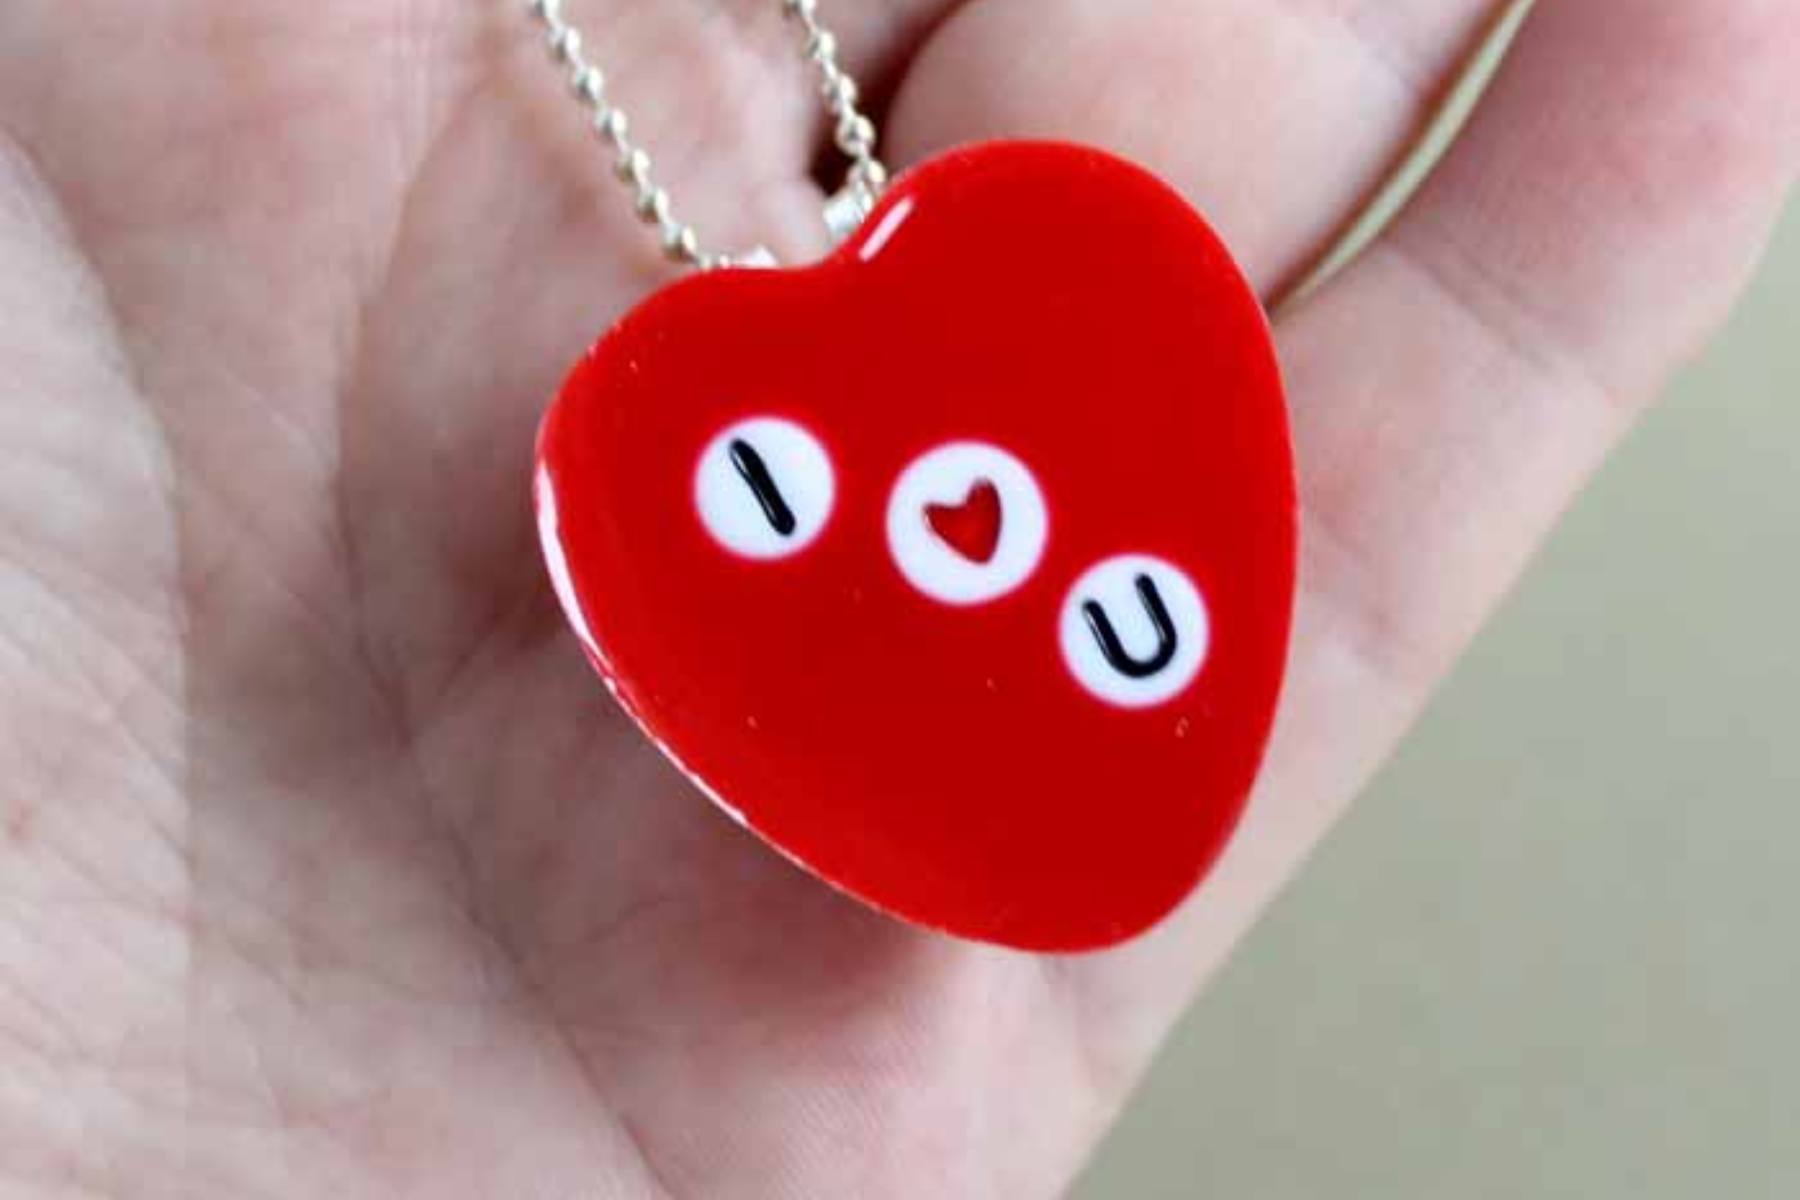 A woman's hand holding a red heart-shaped pendant with the words "I <3 U" engraved on it